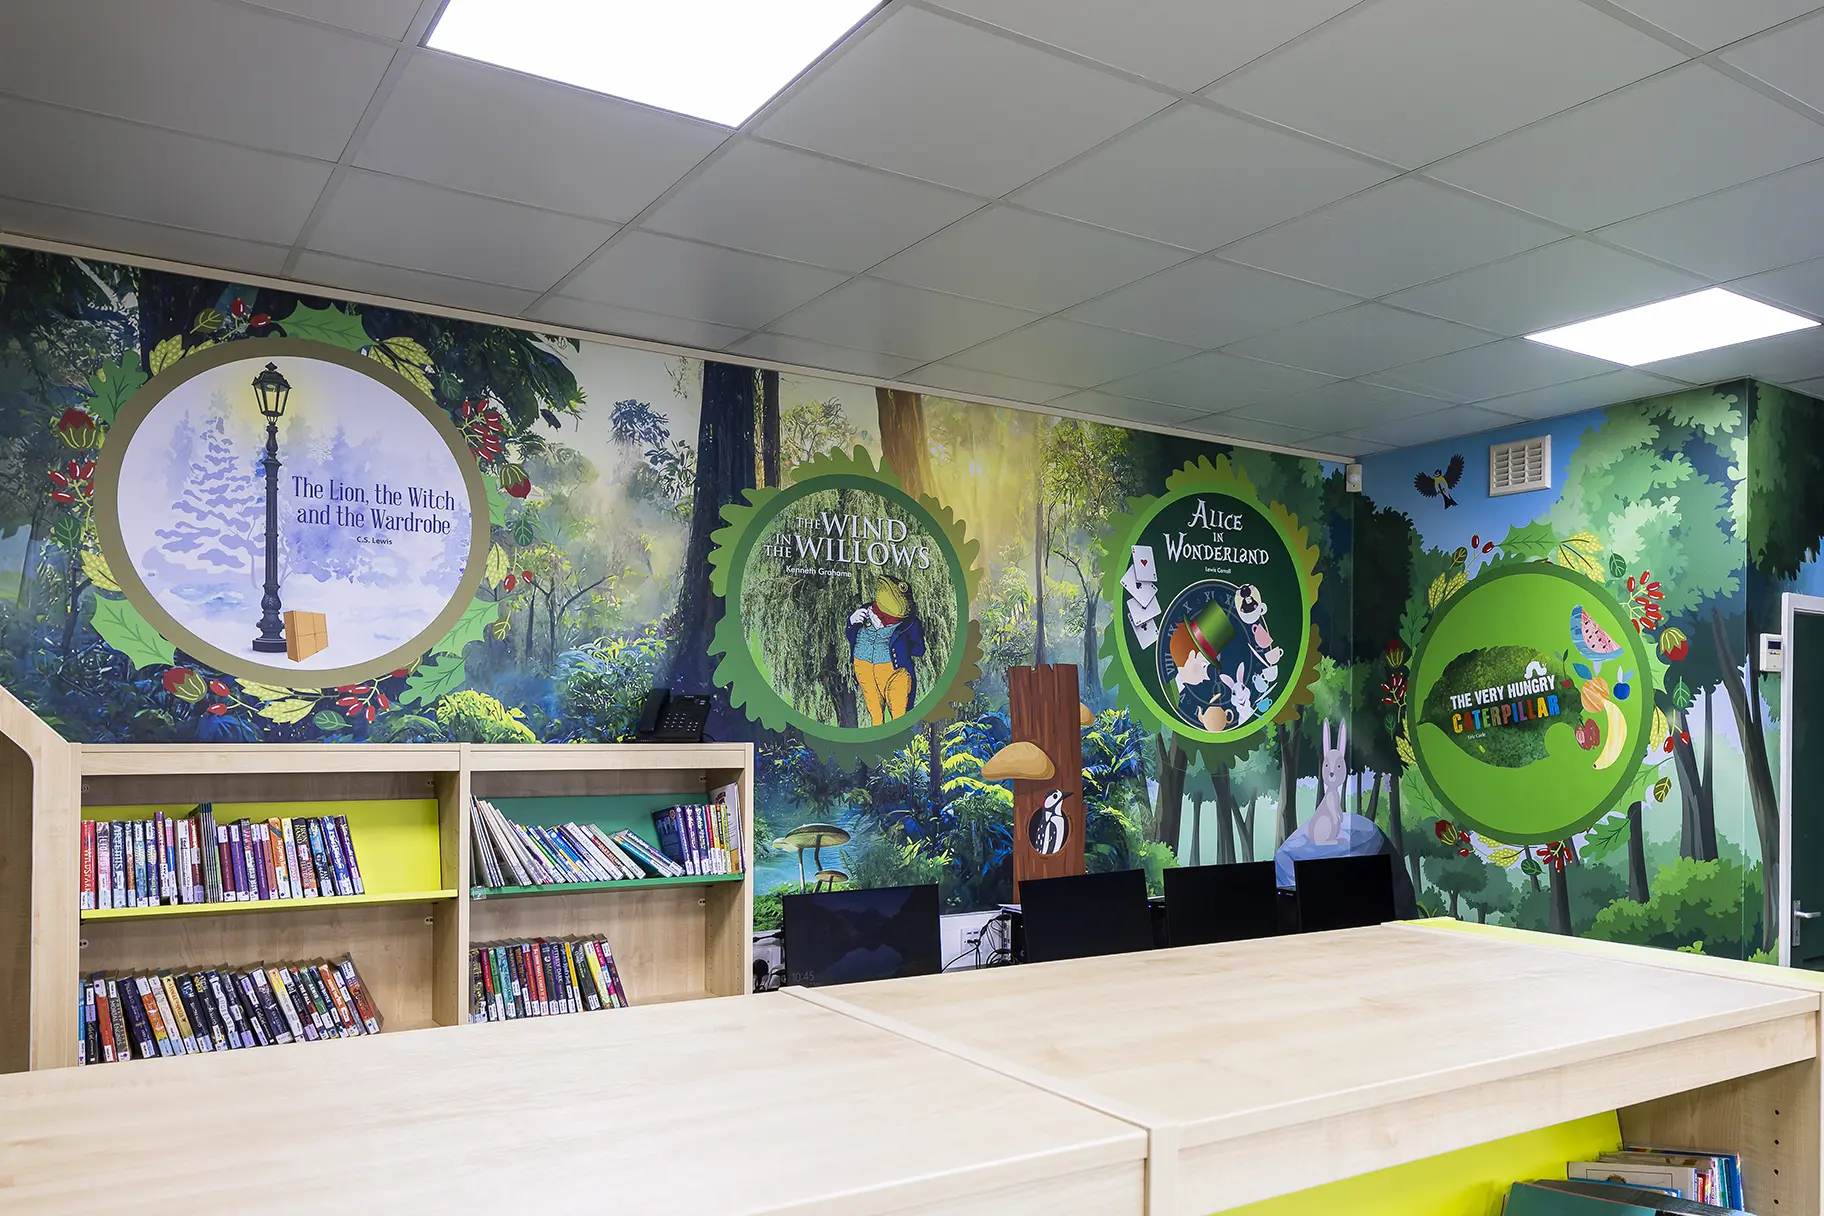 Highwood primary school library wall art